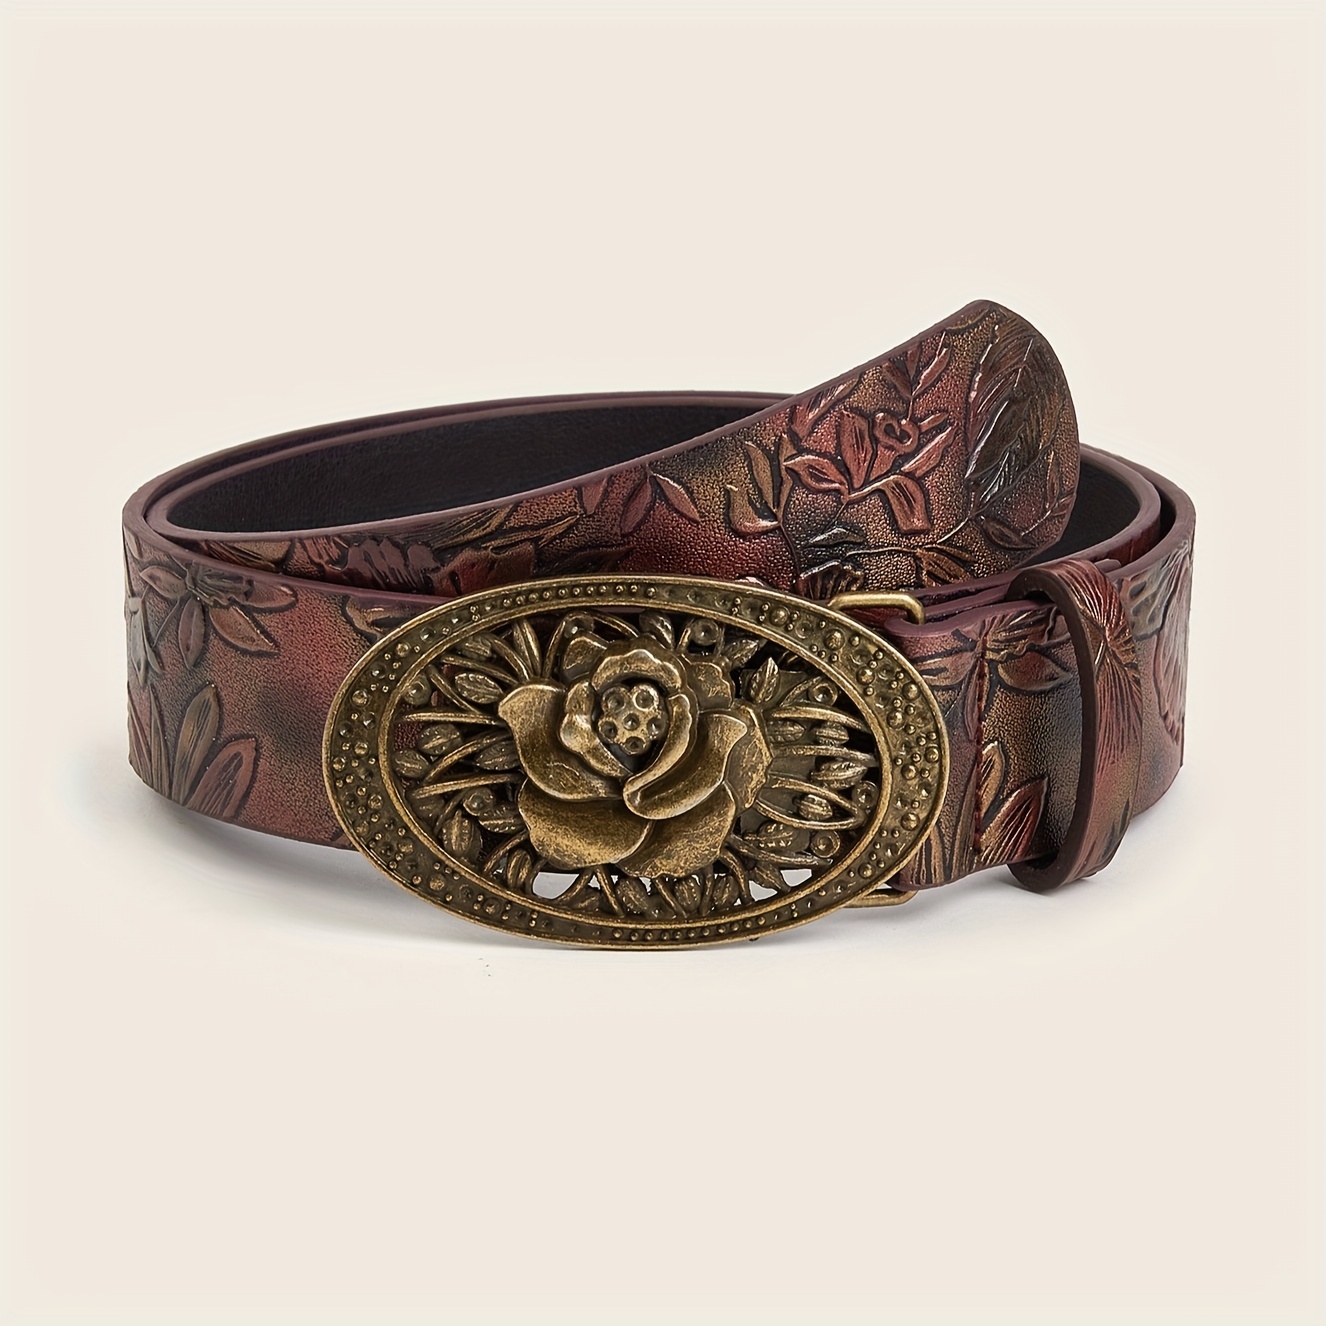 

1pc Vintage Pu Leather Belt Western Floral Engraved Embossed Fashionable Classic Belts Jeans Pants Dresses Accessories For Women